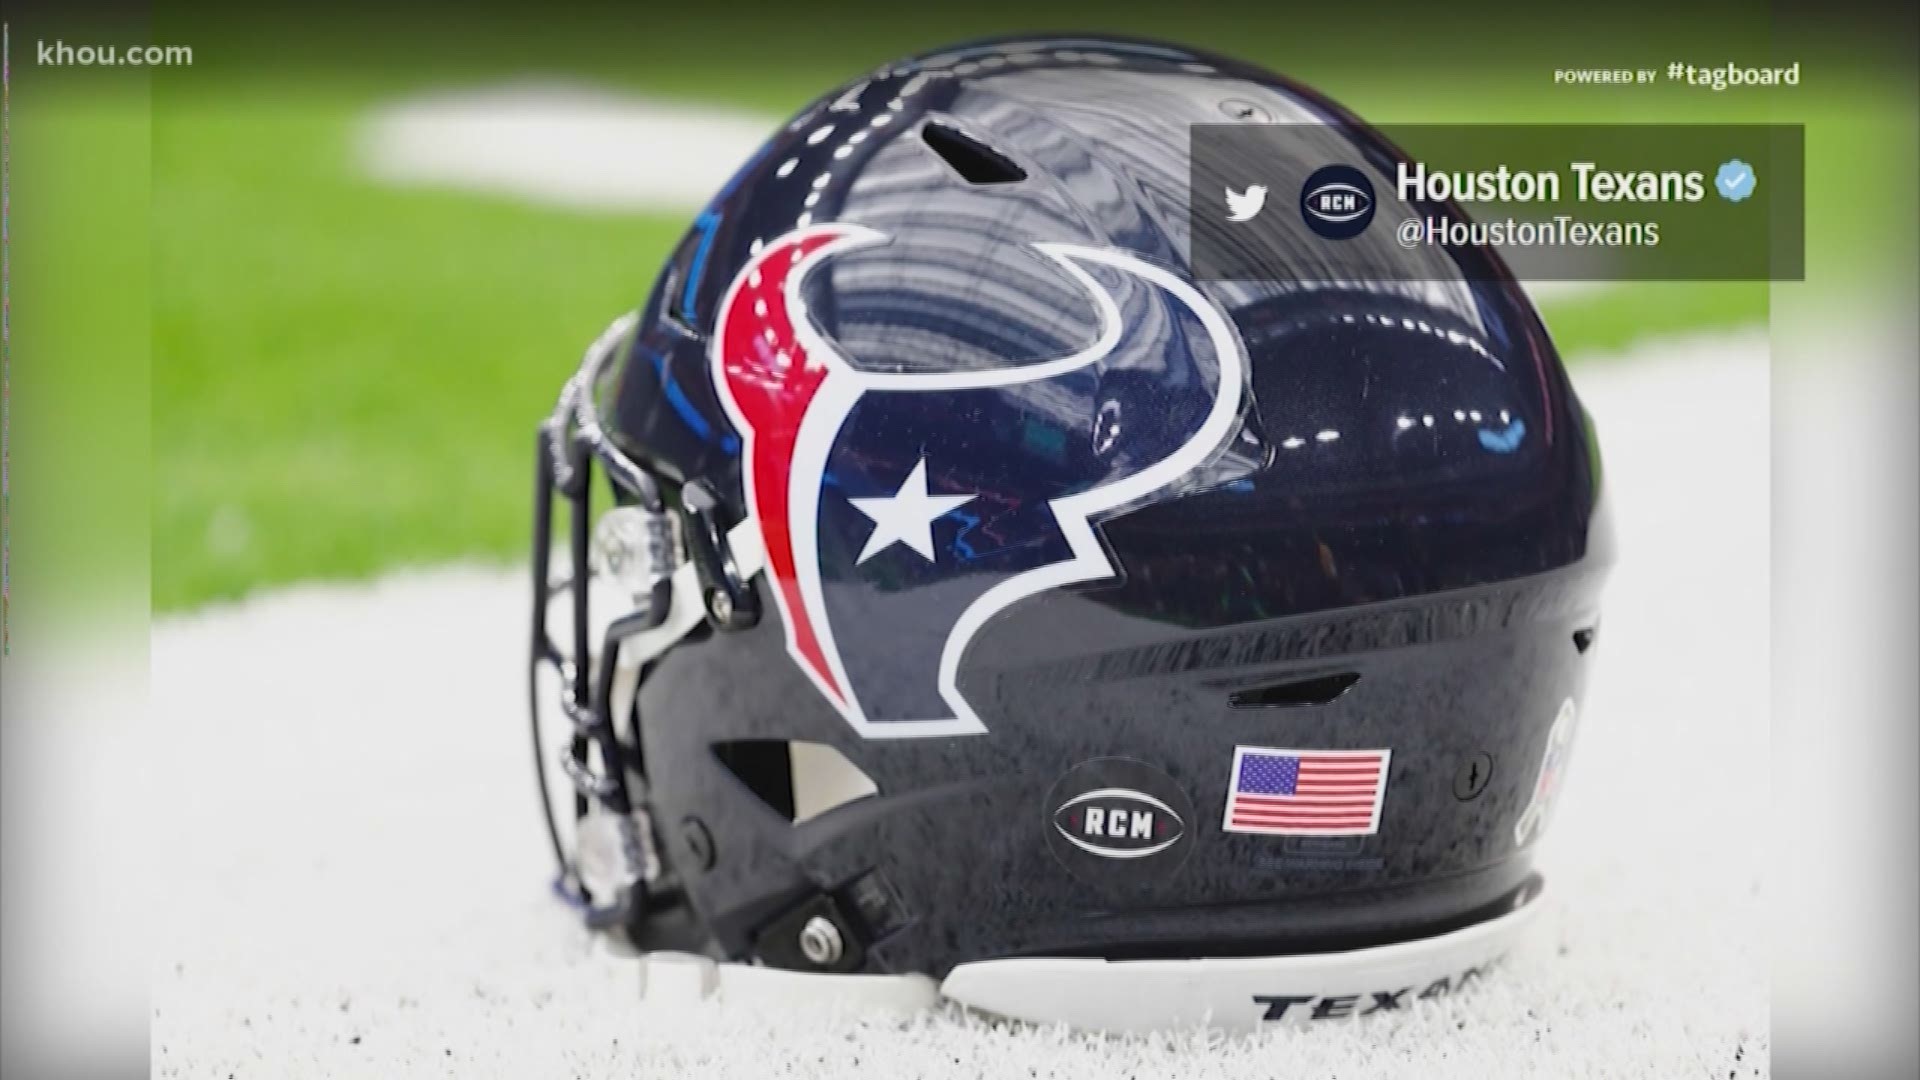 D. Cal McNair, son of Houston Texans owner Bob McNair, issued a heart-felt letter to the city of Houston and fans thanking them for all of their support since the passing of his father.